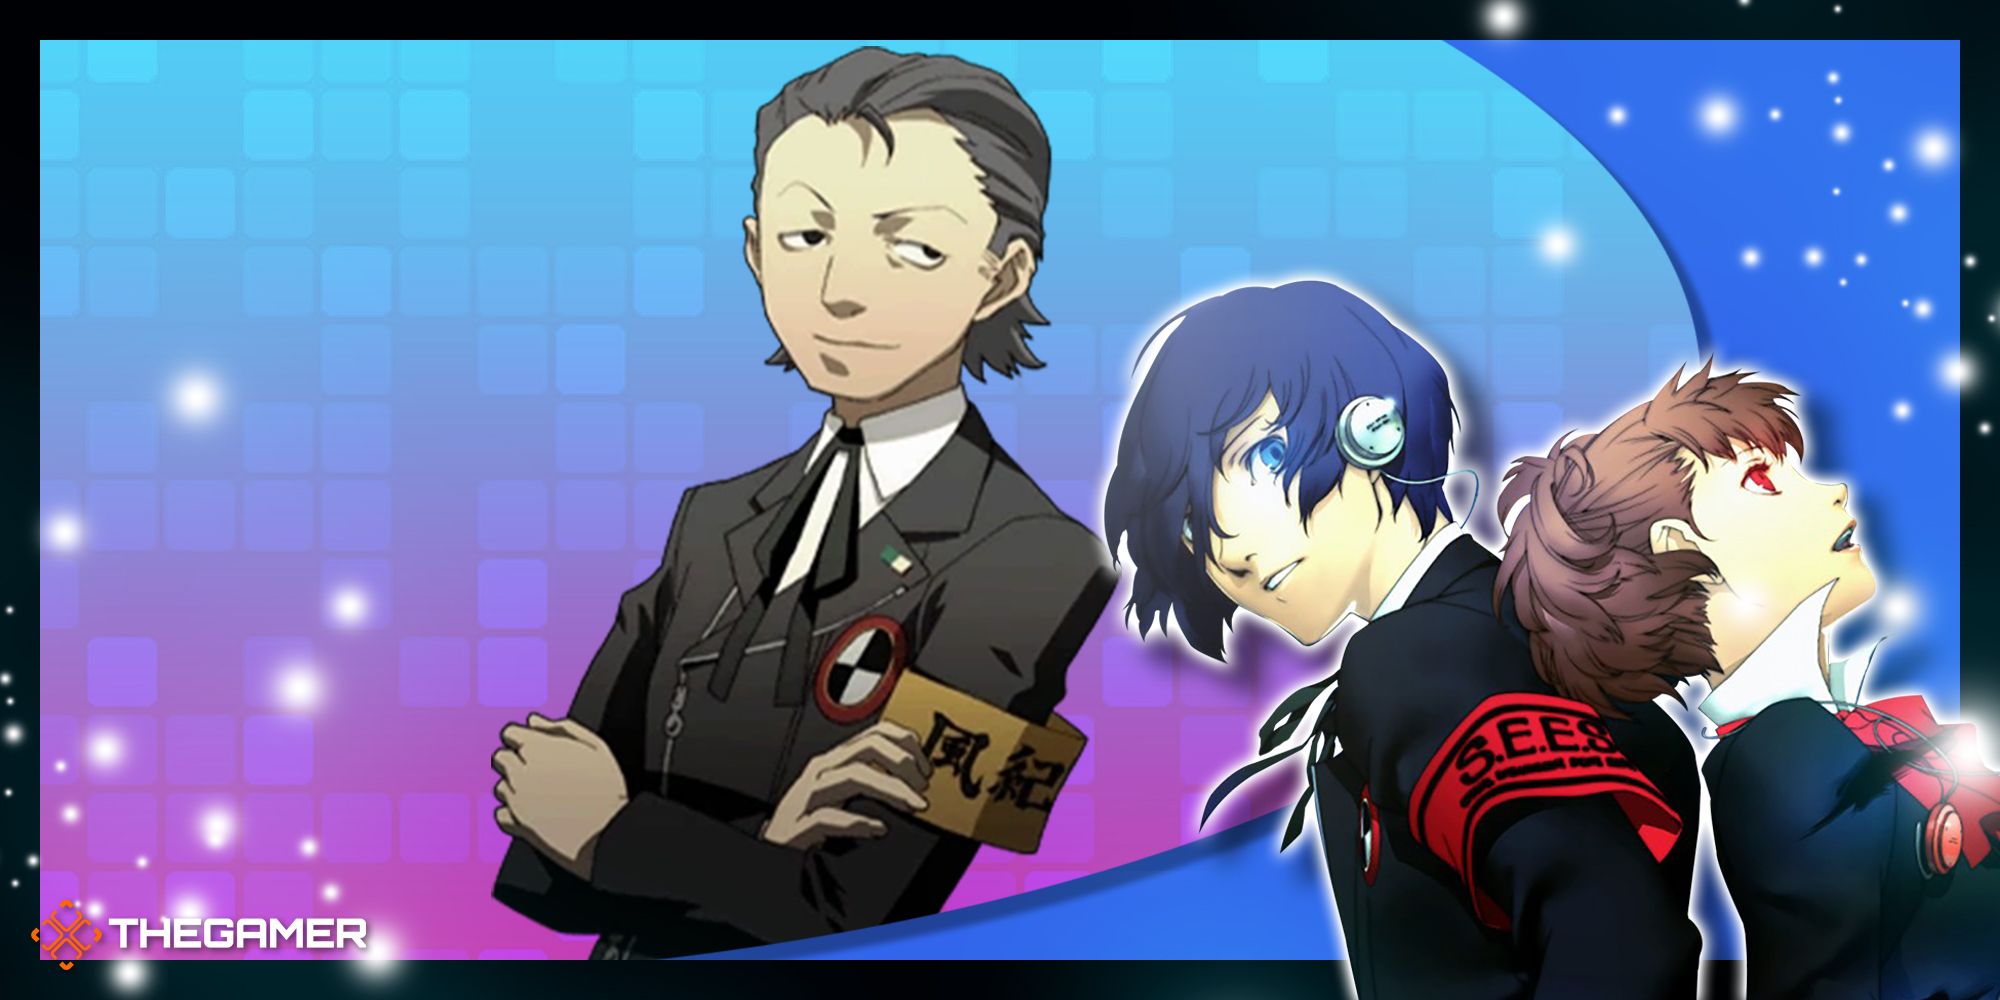 featured image with hidetoshi odagiri and both protagonists for persona 3 portable